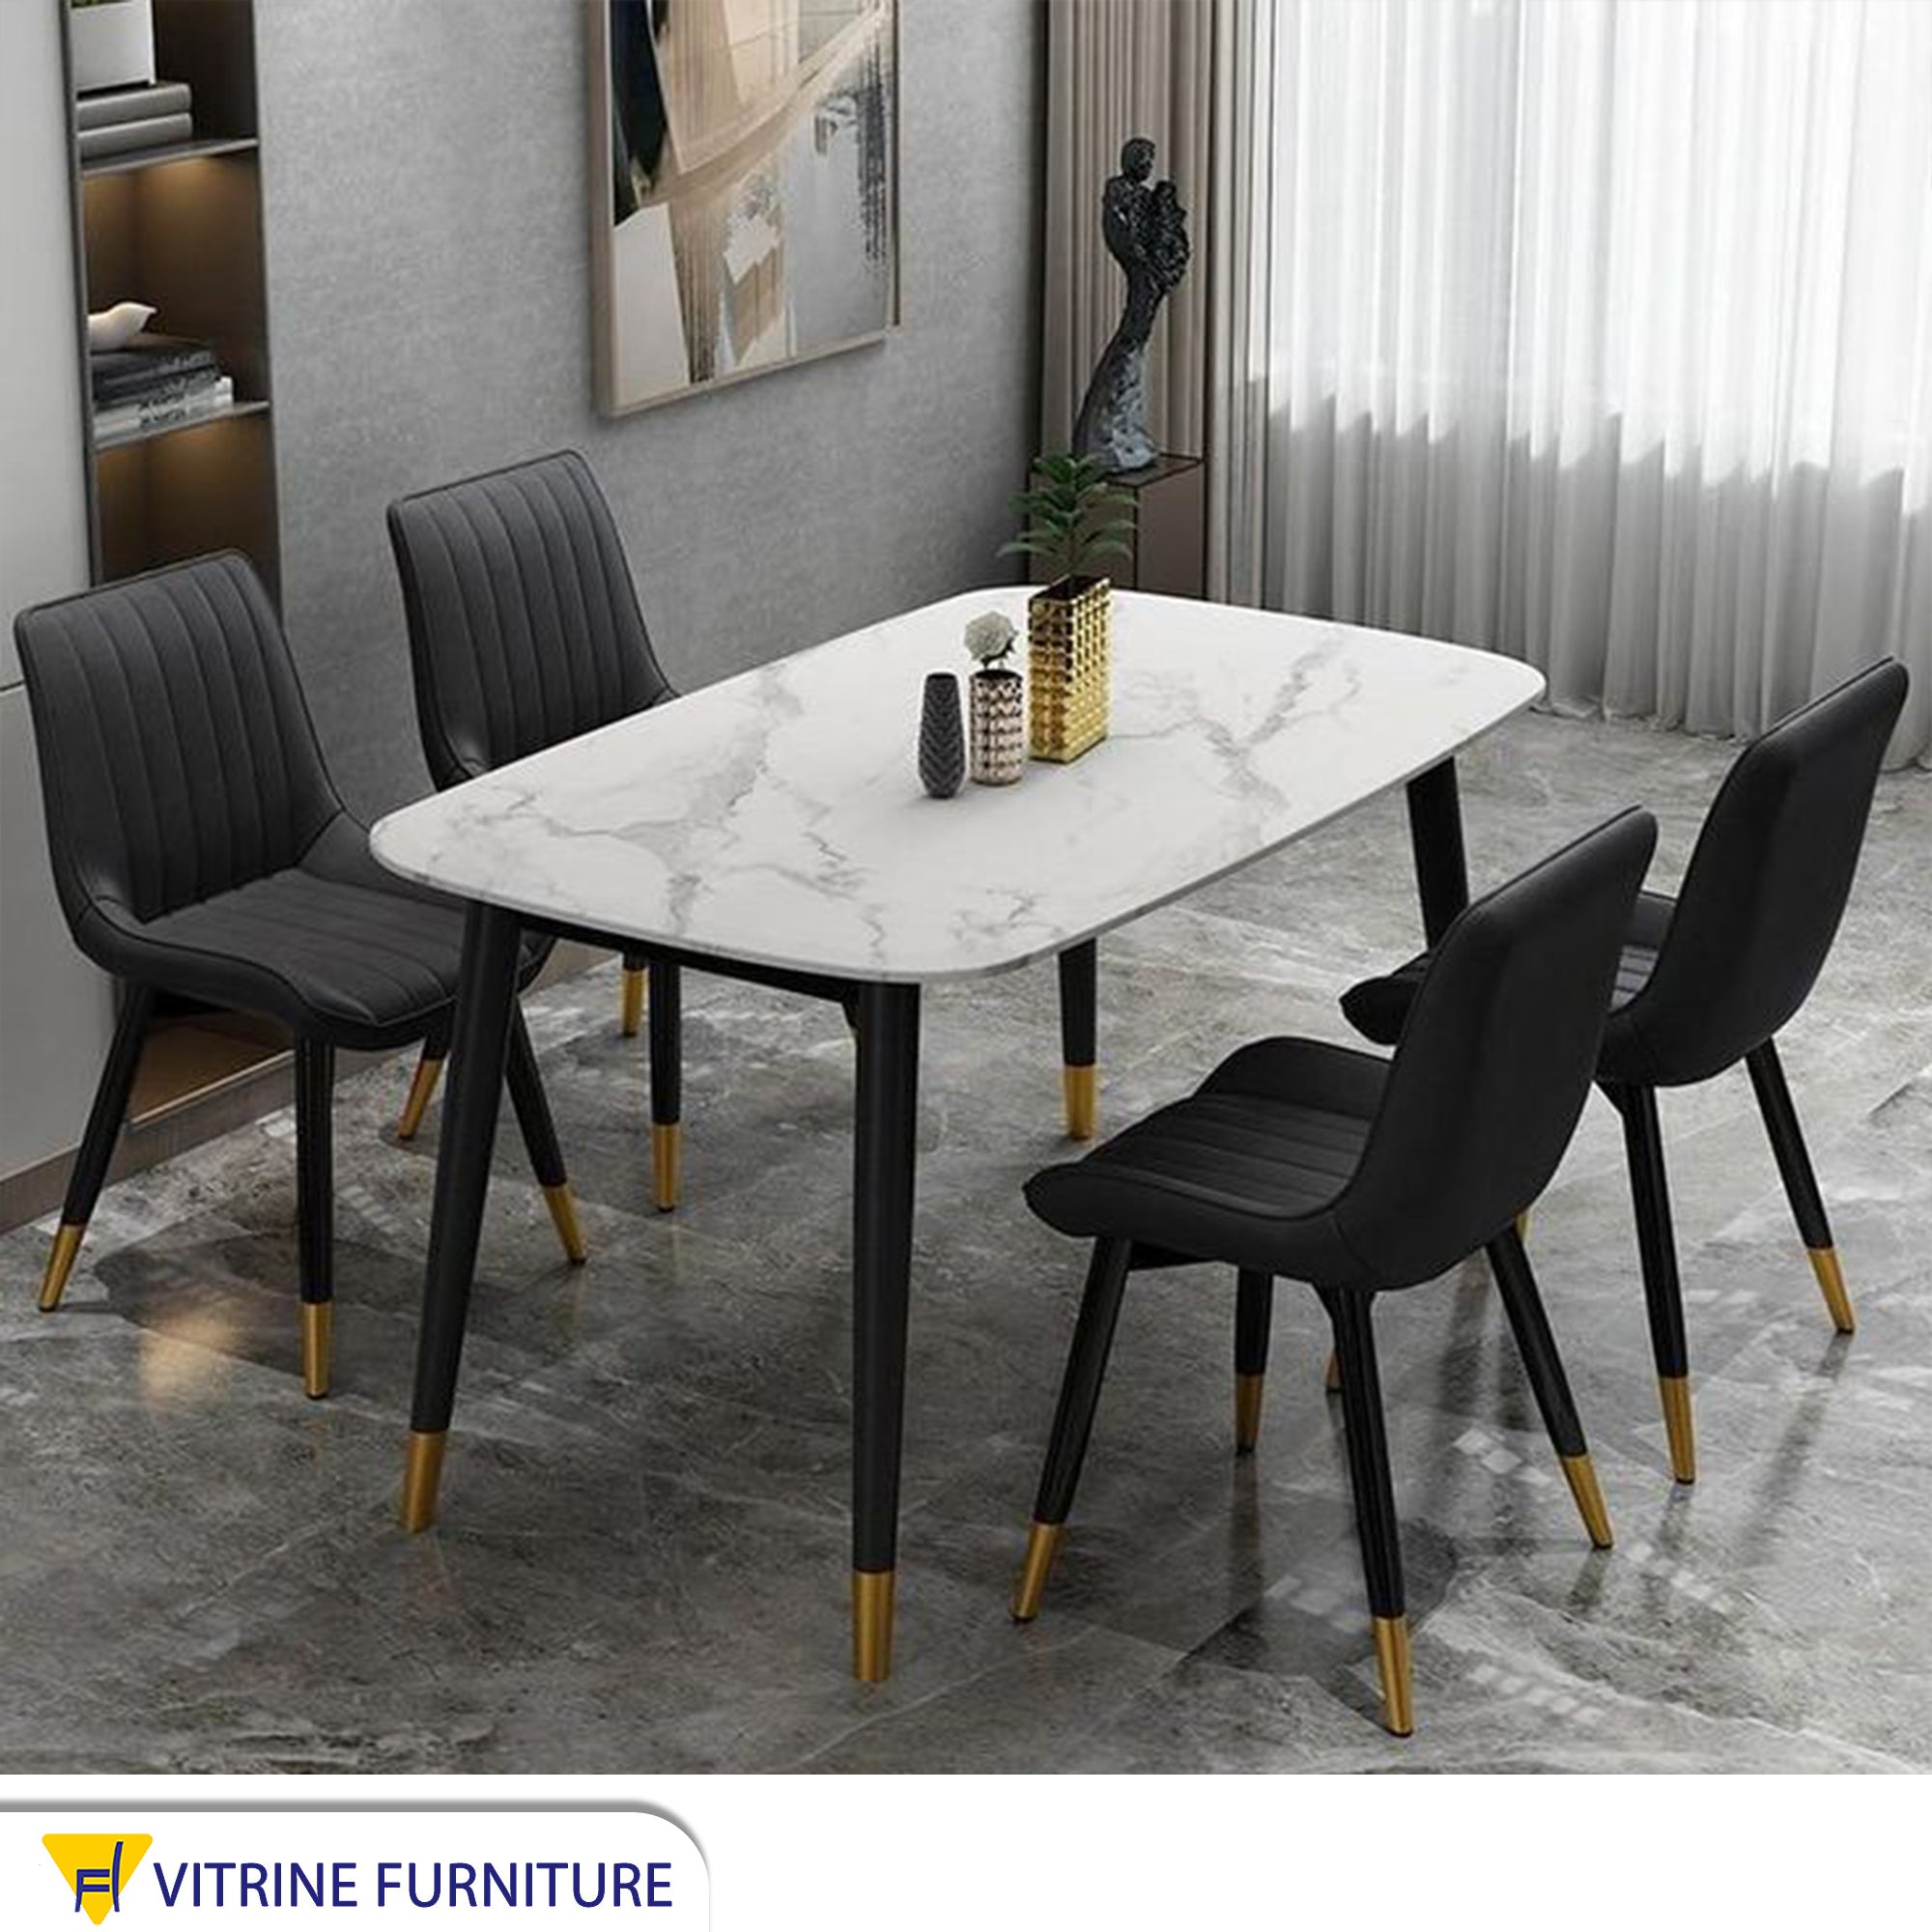 Dining table for limited spaces